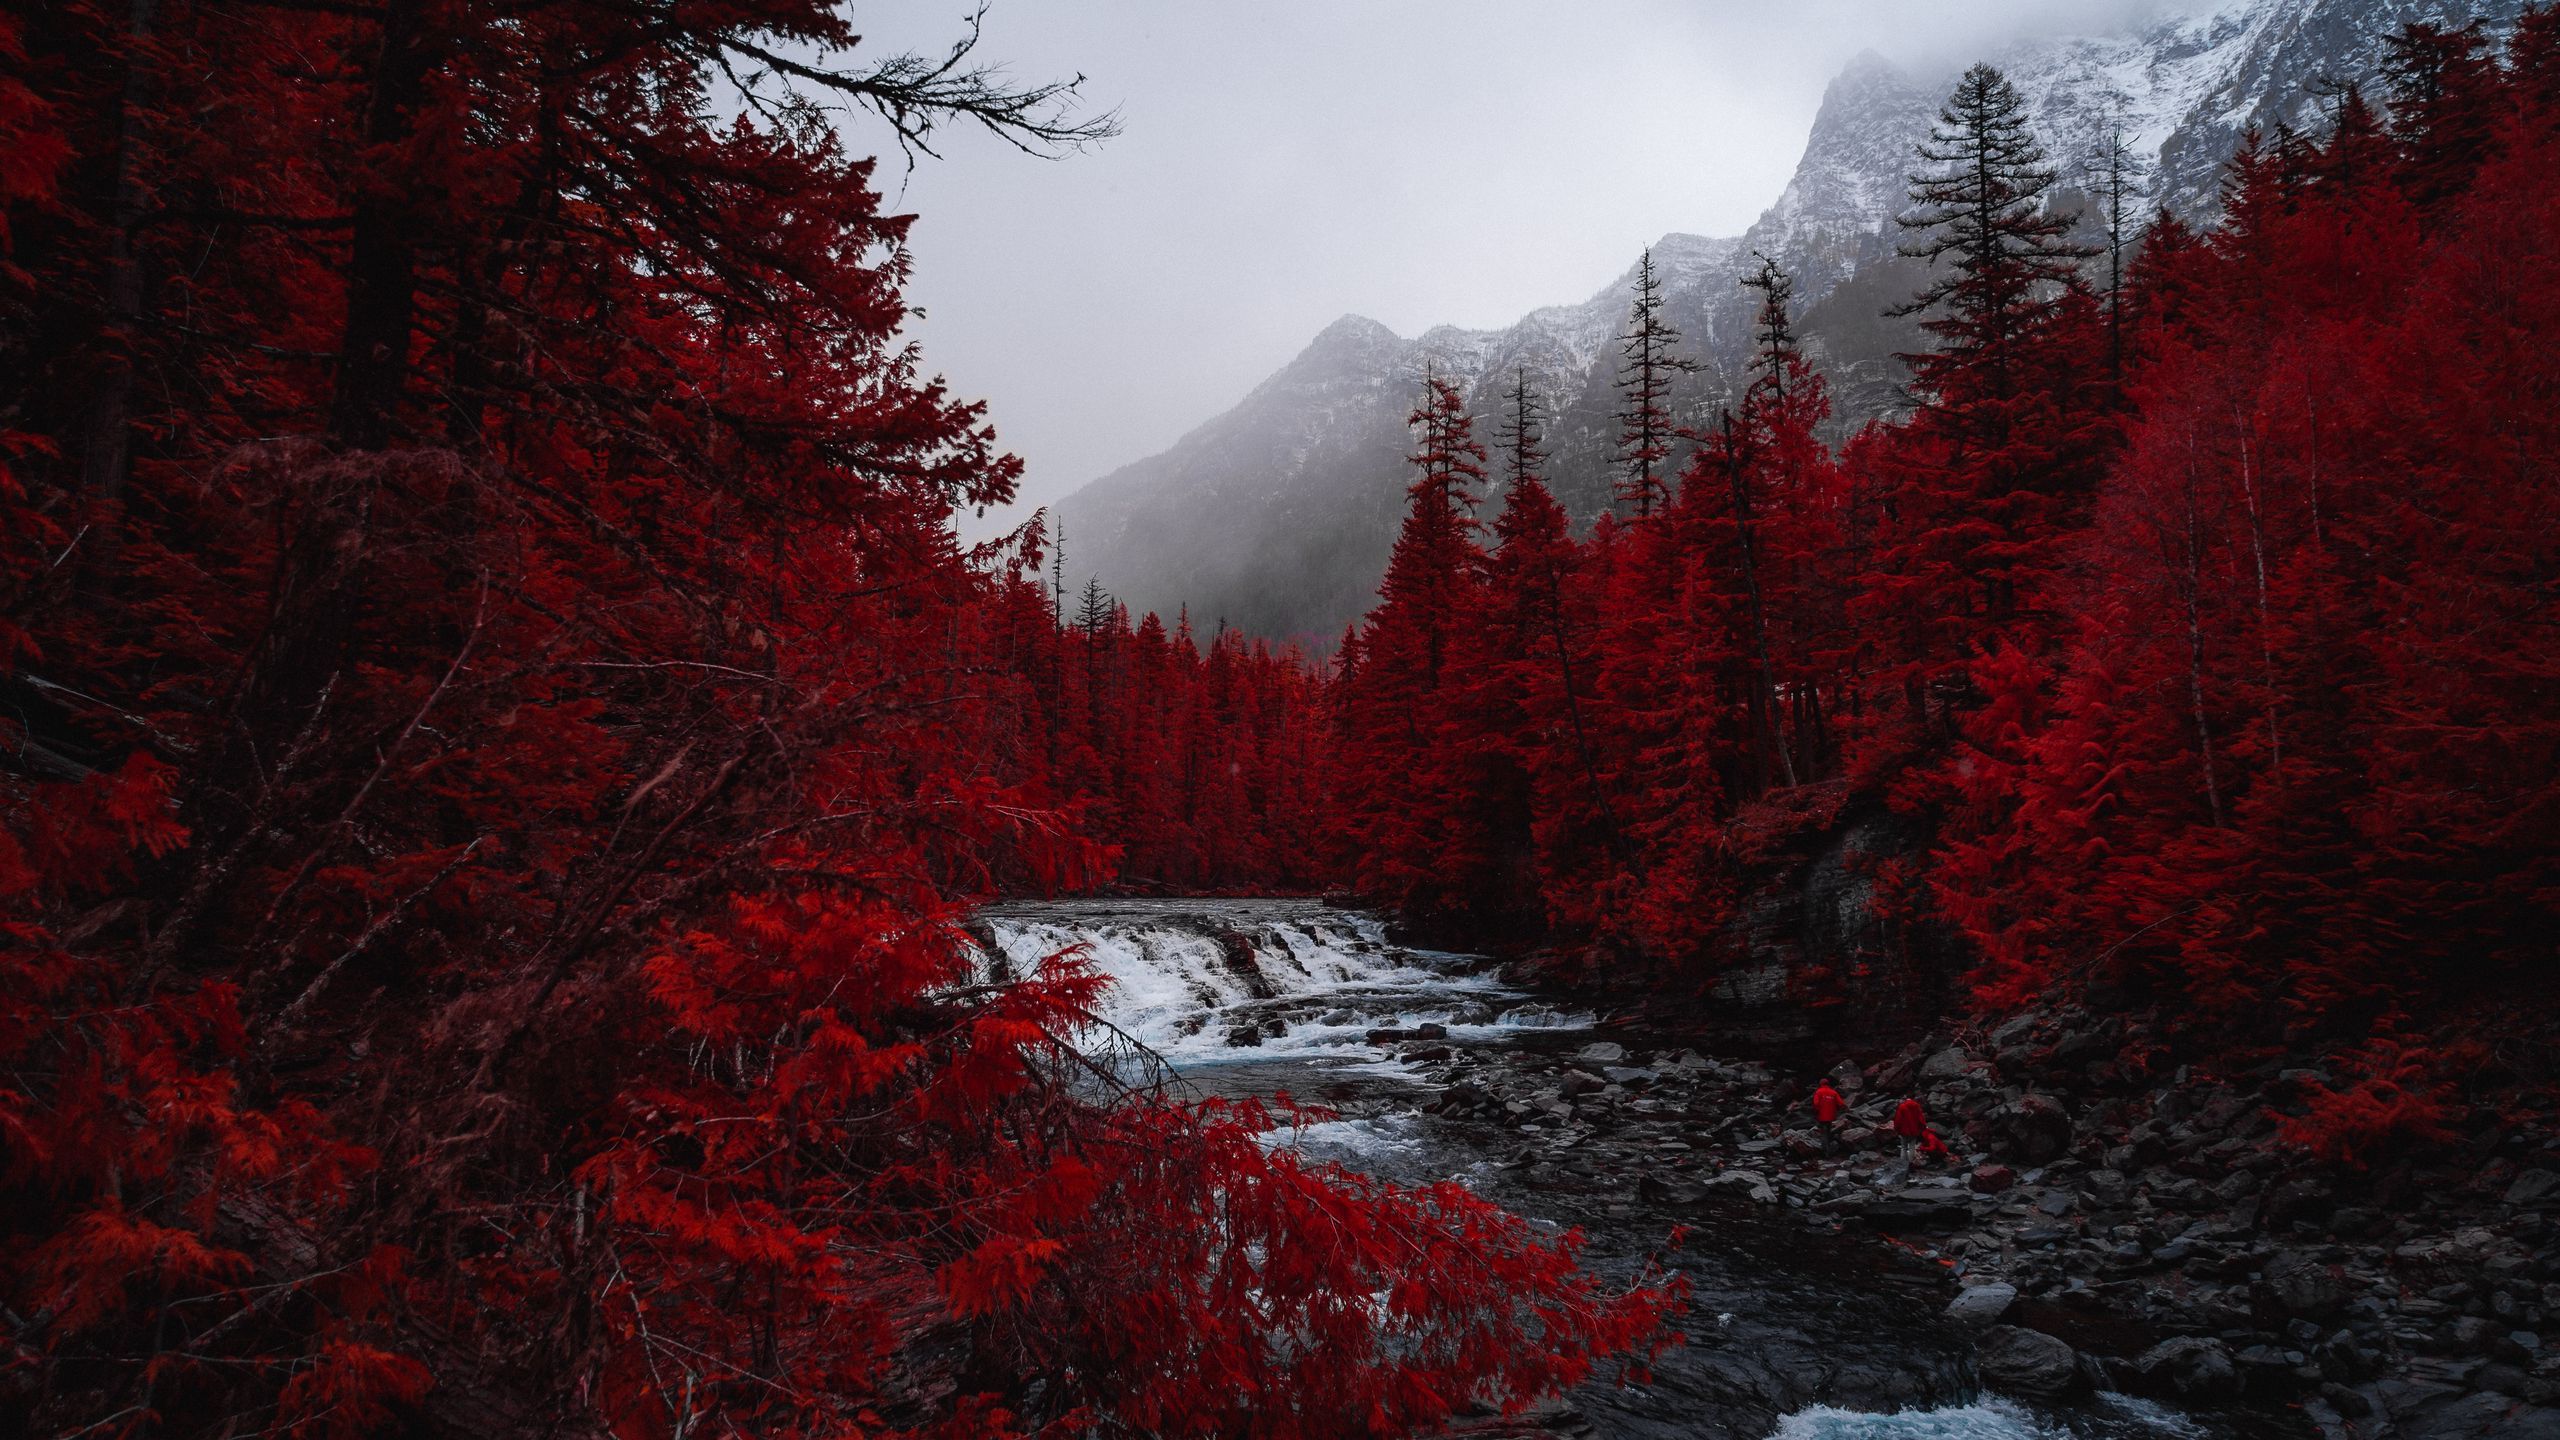 Download wallpaper 2560x1440 river, trees, red, mountains, fog, landscape widescreen 16:9 HD background